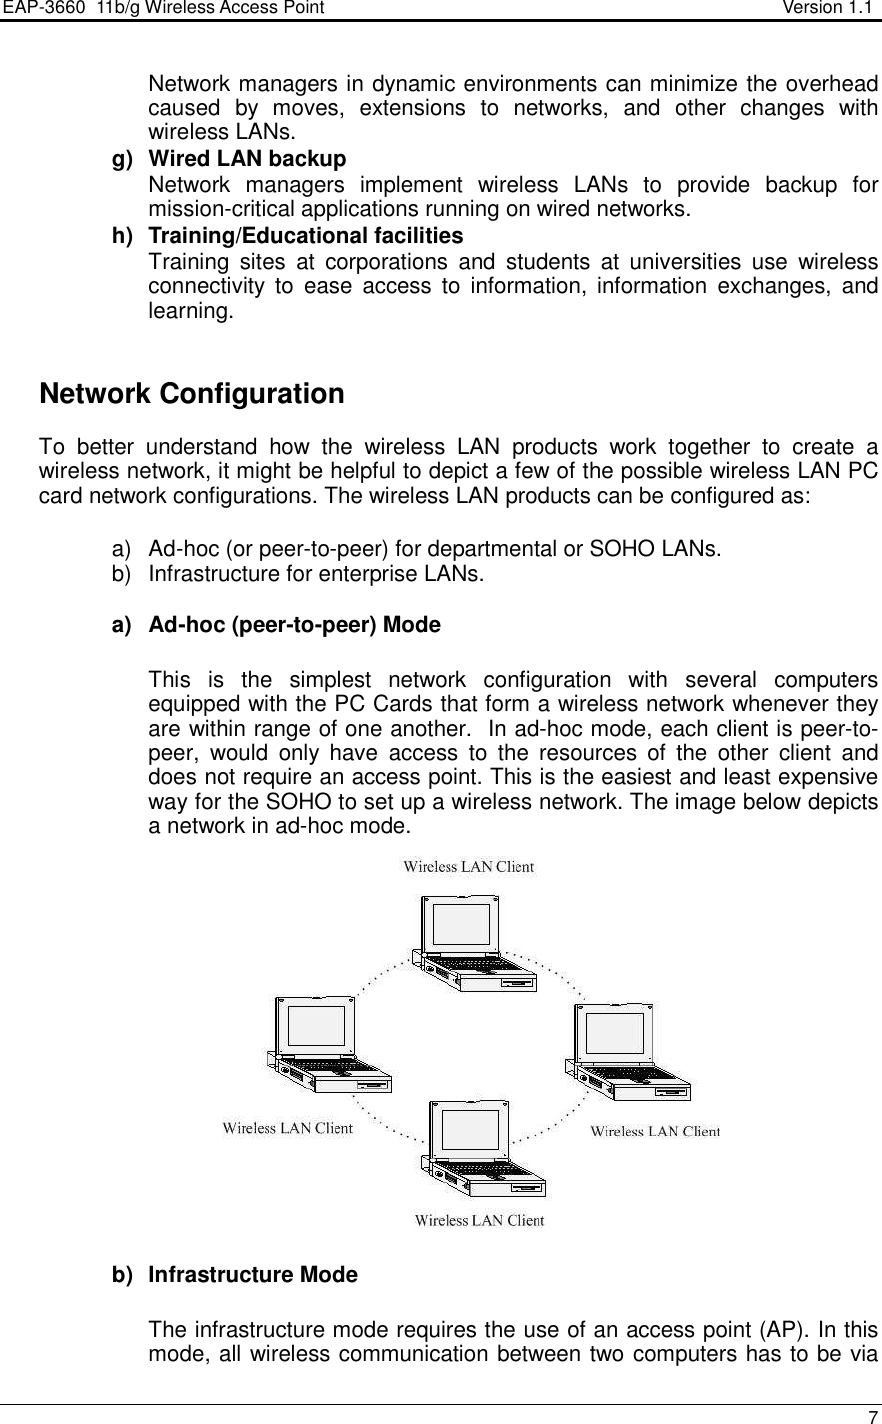 EAP-3660  11b/g Wireless Access Point                                                           Version 1.1    7  Network managers in dynamic environments can minimize the overhead caused  by  moves,  extensions  to  networks,  and  other  changes  with wireless LANs. g)  Wired LAN backup Network  managers  implement  wireless  LANs  to  provide  backup  for mission-critical applications running on wired networks. h)  Training/Educational facilities Training  sites  at  corporations  and  students  at  universities  use  wireless connectivity  to  ease  access  to  information, information  exchanges,  and learning.     Network Configuration To  better  understand  how  the  wireless  LAN  products  work  together  to  create  a wireless network, it might be helpful to depict a few of the possible wireless LAN PC card network configurations. The wireless LAN products can be configured as:  a)  Ad-hoc (or peer-to-peer) for departmental or SOHO LANs. b)  Infrastructure for enterprise LANs.  a)  Ad-hoc (peer-to-peer) Mode  This  is  the  simplest  network  configuration  with  several  computers equipped with the PC Cards that form a wireless network whenever they are within range of one another.  In ad-hoc mode, each client is peer-to-peer,  would  only  have  access  to  the  resources  of  the  other  client  and does not require an access point. This is the easiest and least expensive way for the SOHO to set up a wireless network. The image below depicts a network in ad-hoc mode.                 b)  Infrastructure Mode  The infrastructure mode requires the use of an access point (AP). In this mode, all wireless communication between two computers has to be via  